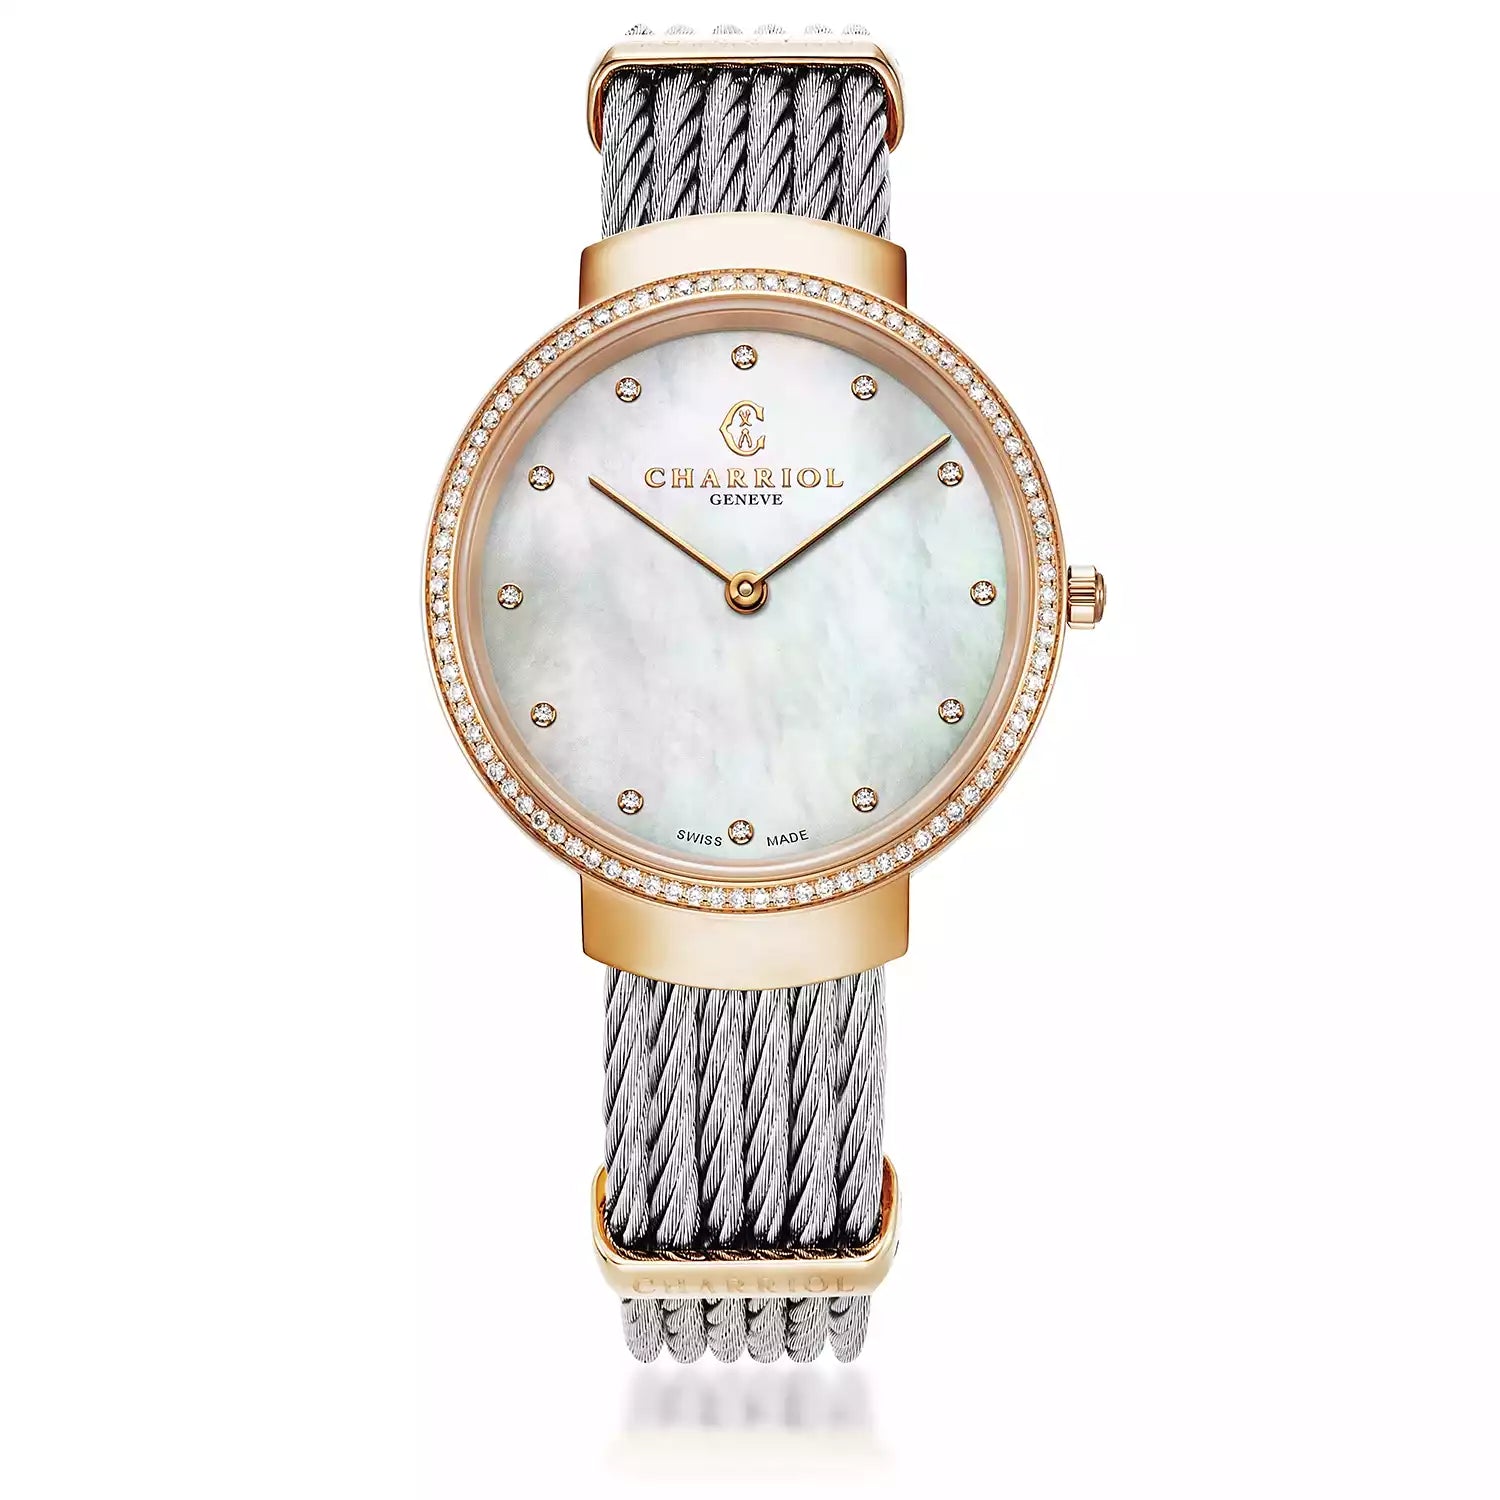 SLIM, 34MM, QUARTZ CALIBRE, WHITE MOTHER OF PEARL DIAL, STEEL ROSE GOLD PVD WITH 88 DIAMONDS BEZEL, STEEL CABLE BRACELET - Charriol Geneve -  Watch